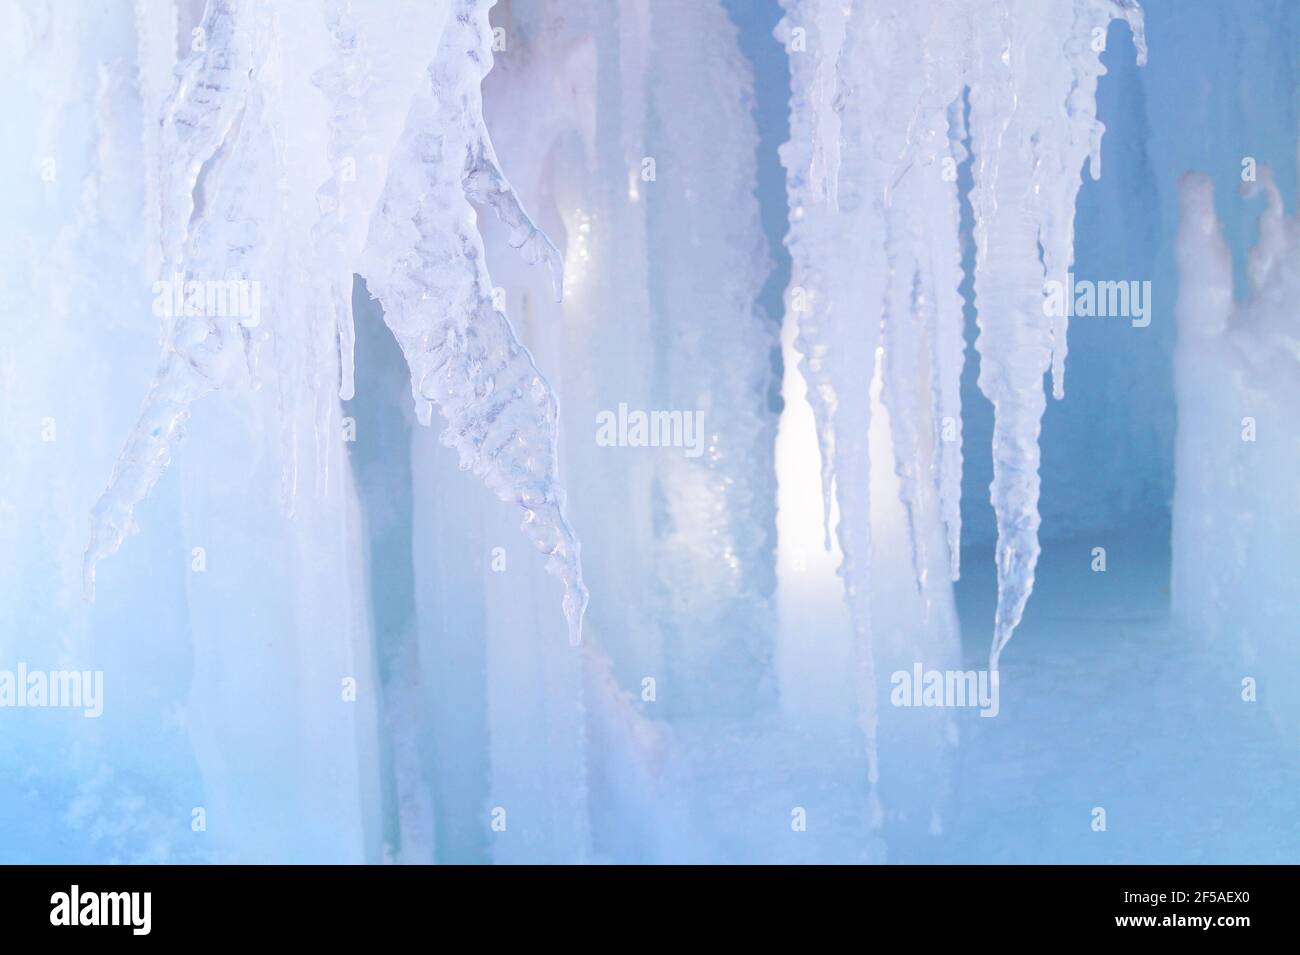 Ice passages in the rocks with large icicles Stock Photo